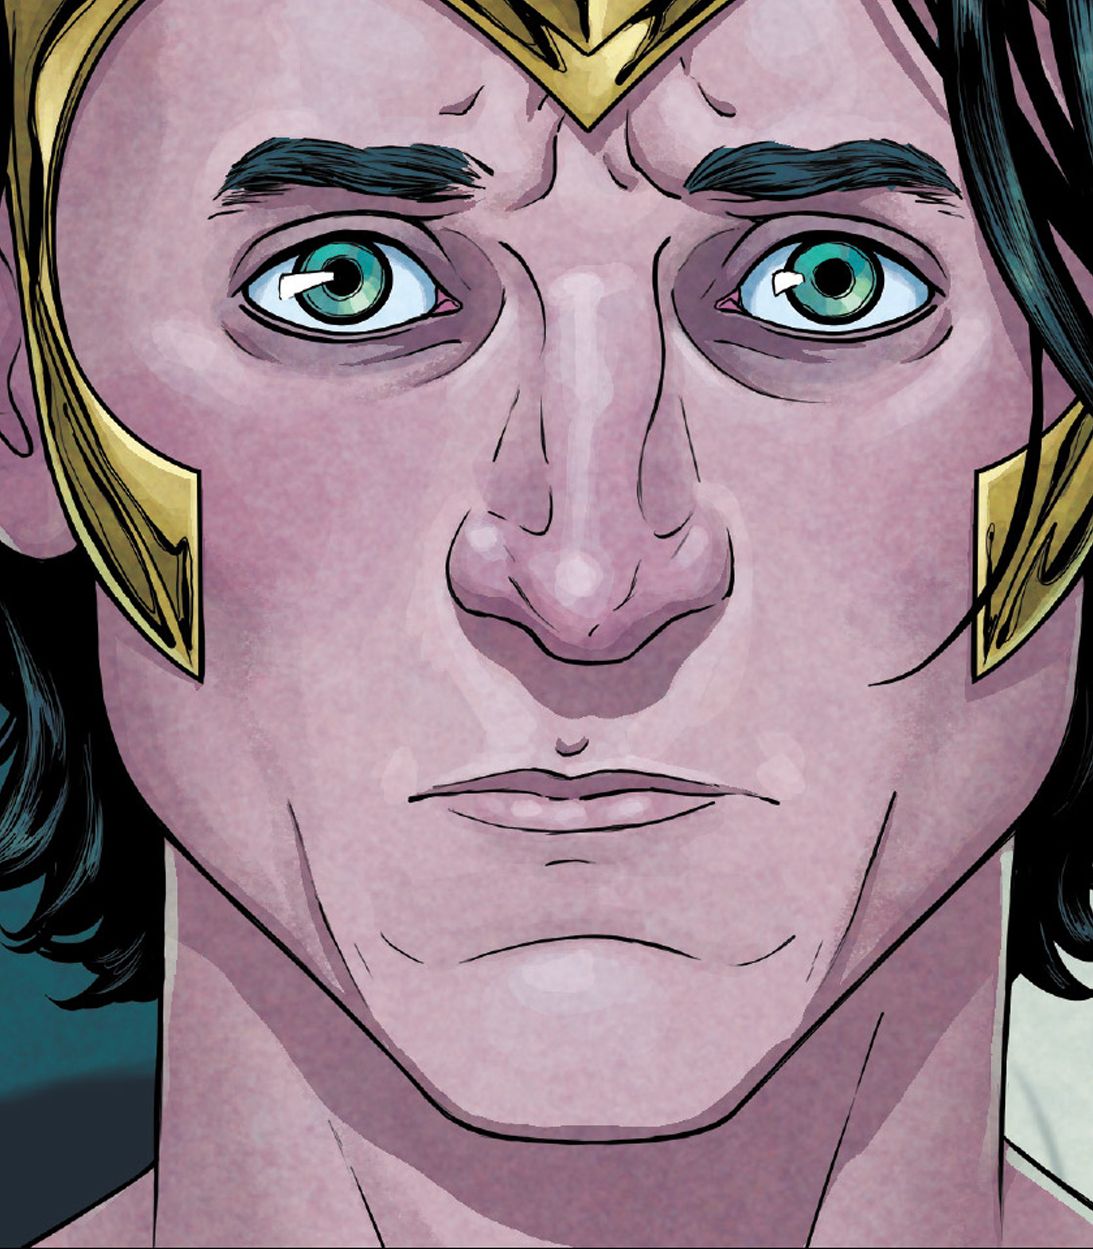 Loki in War of the Realms by Russell Dauterman